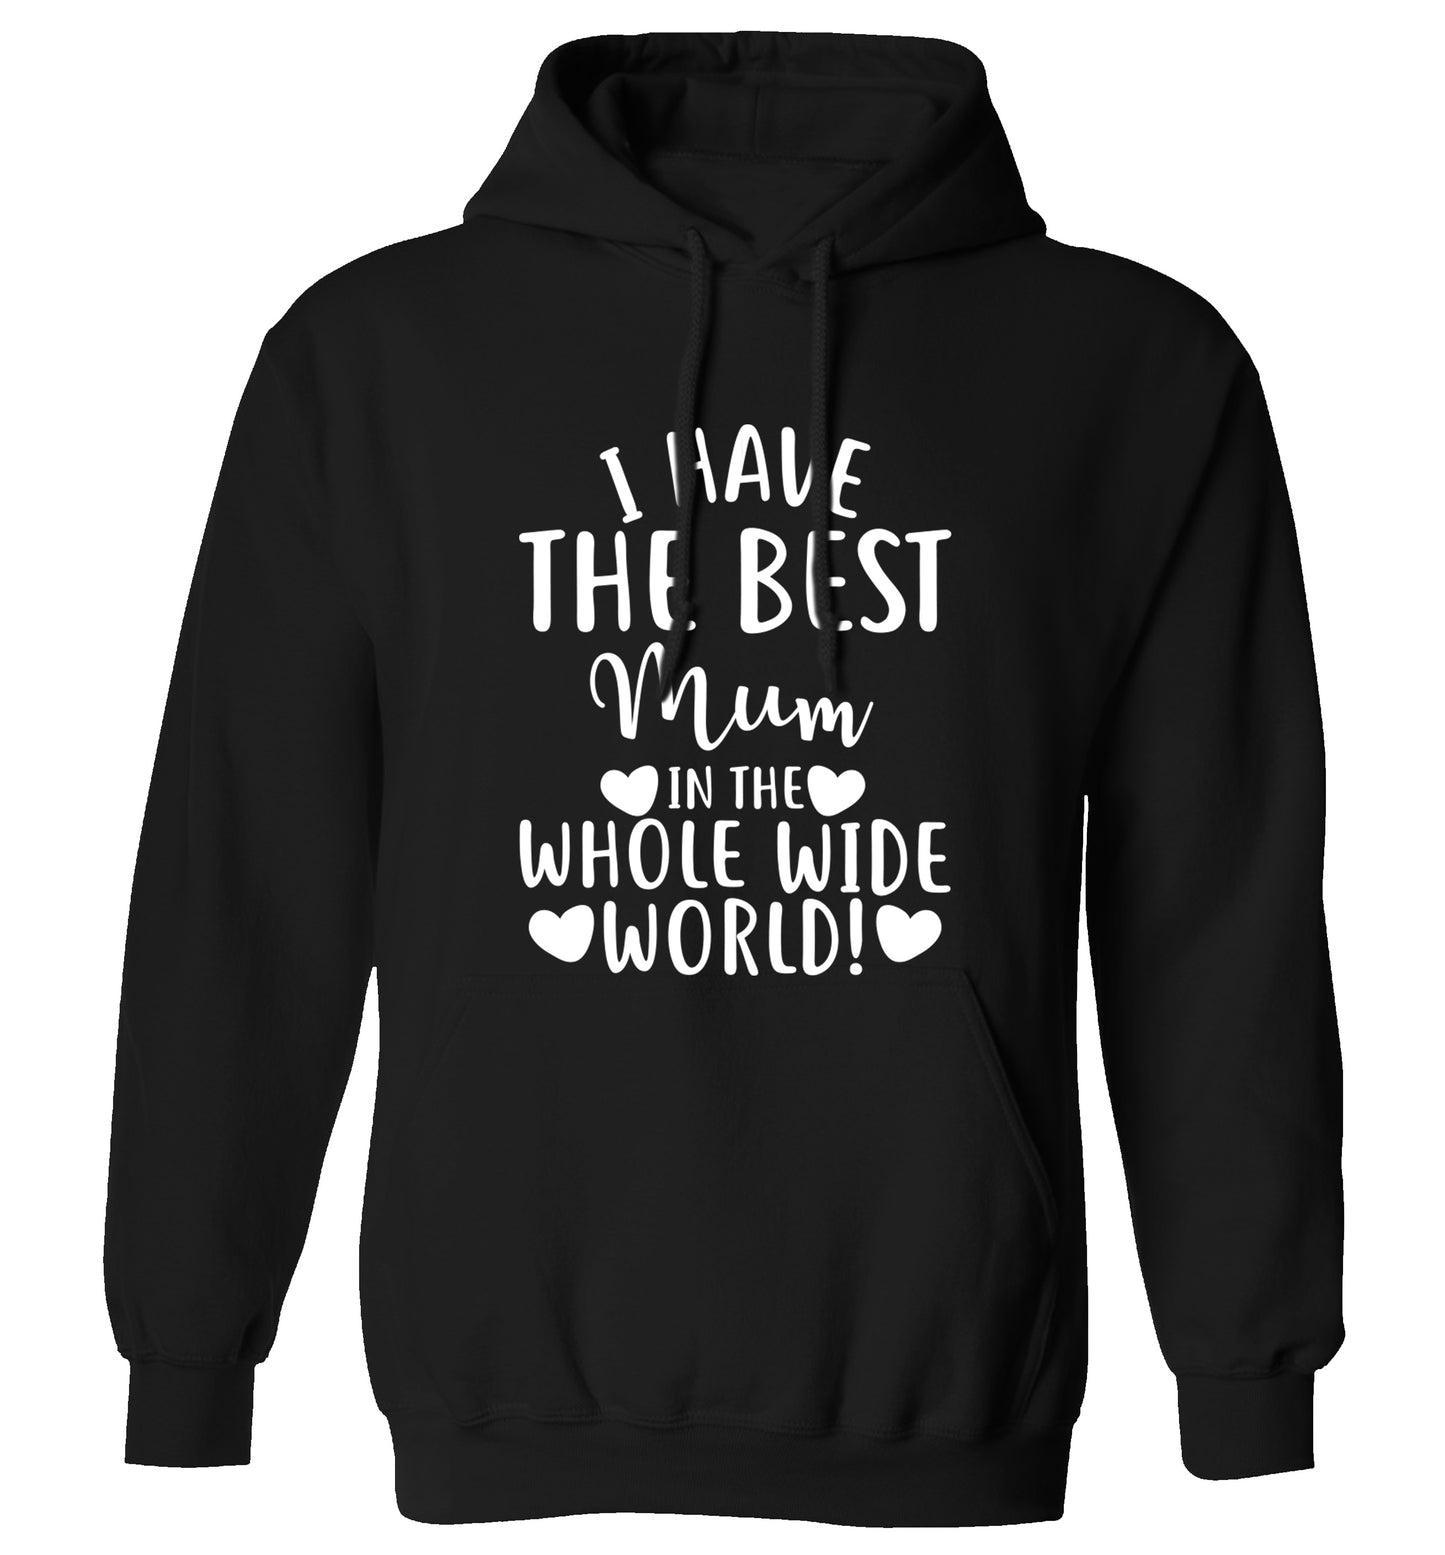 I have the best mum in the whole wide world! adults unisex black hoodie 2XL